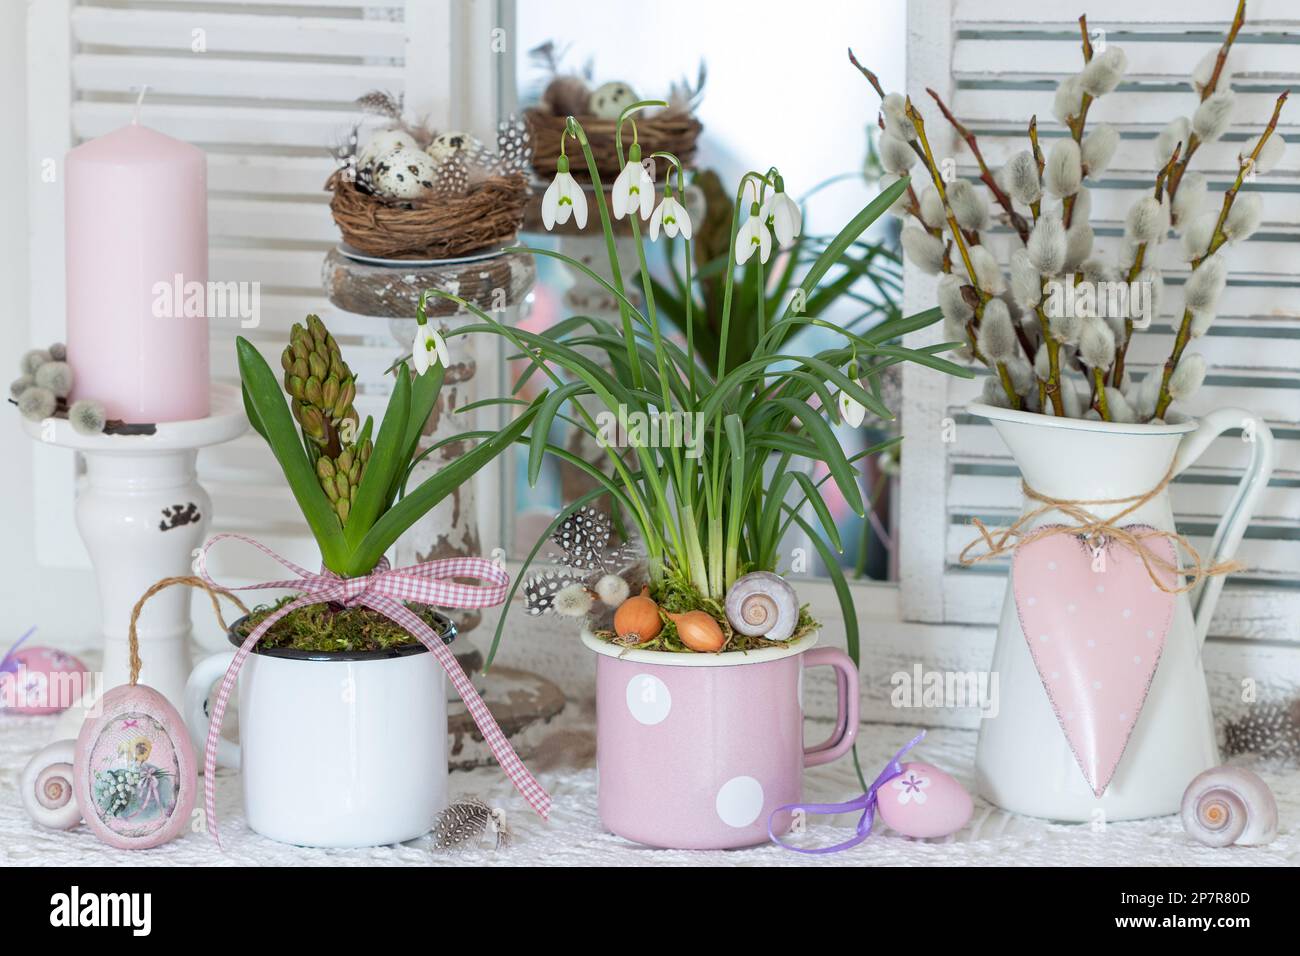 spring arrangement with snowdrops, hyacinth and willow catkins in vintage enamel pots Stock Photo